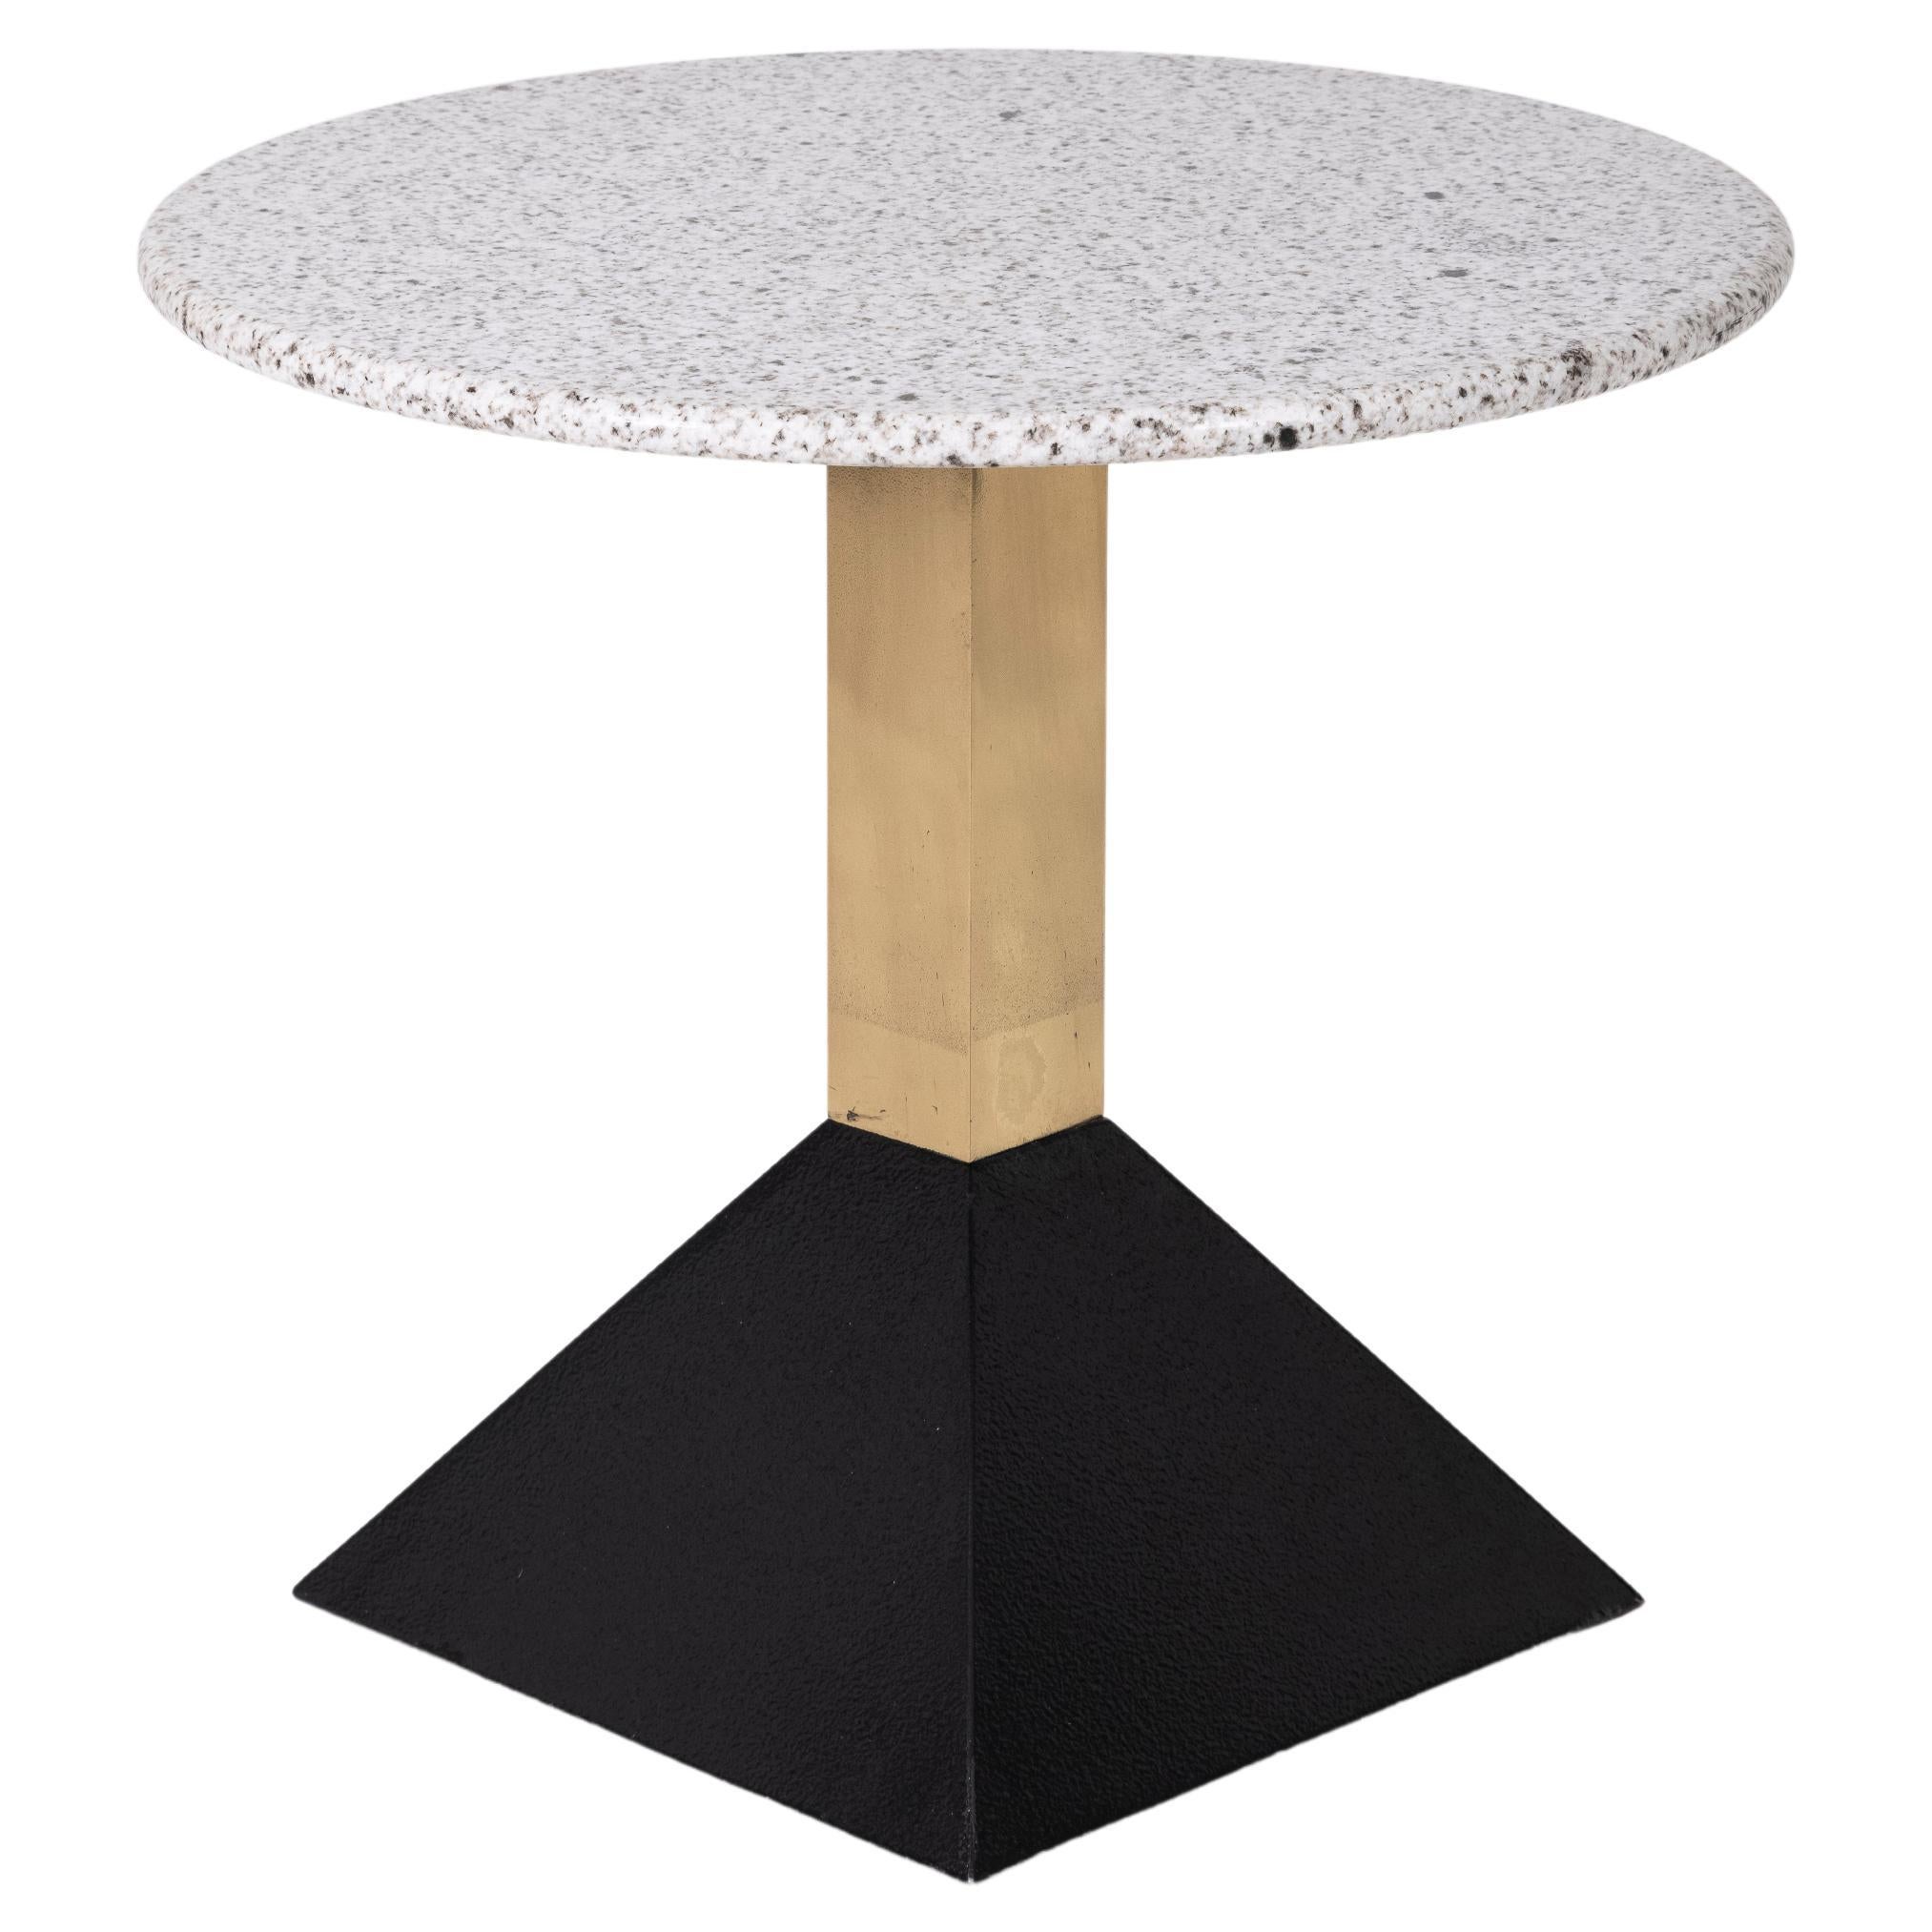 Side table or pedestal table in Memphis granite For Sale